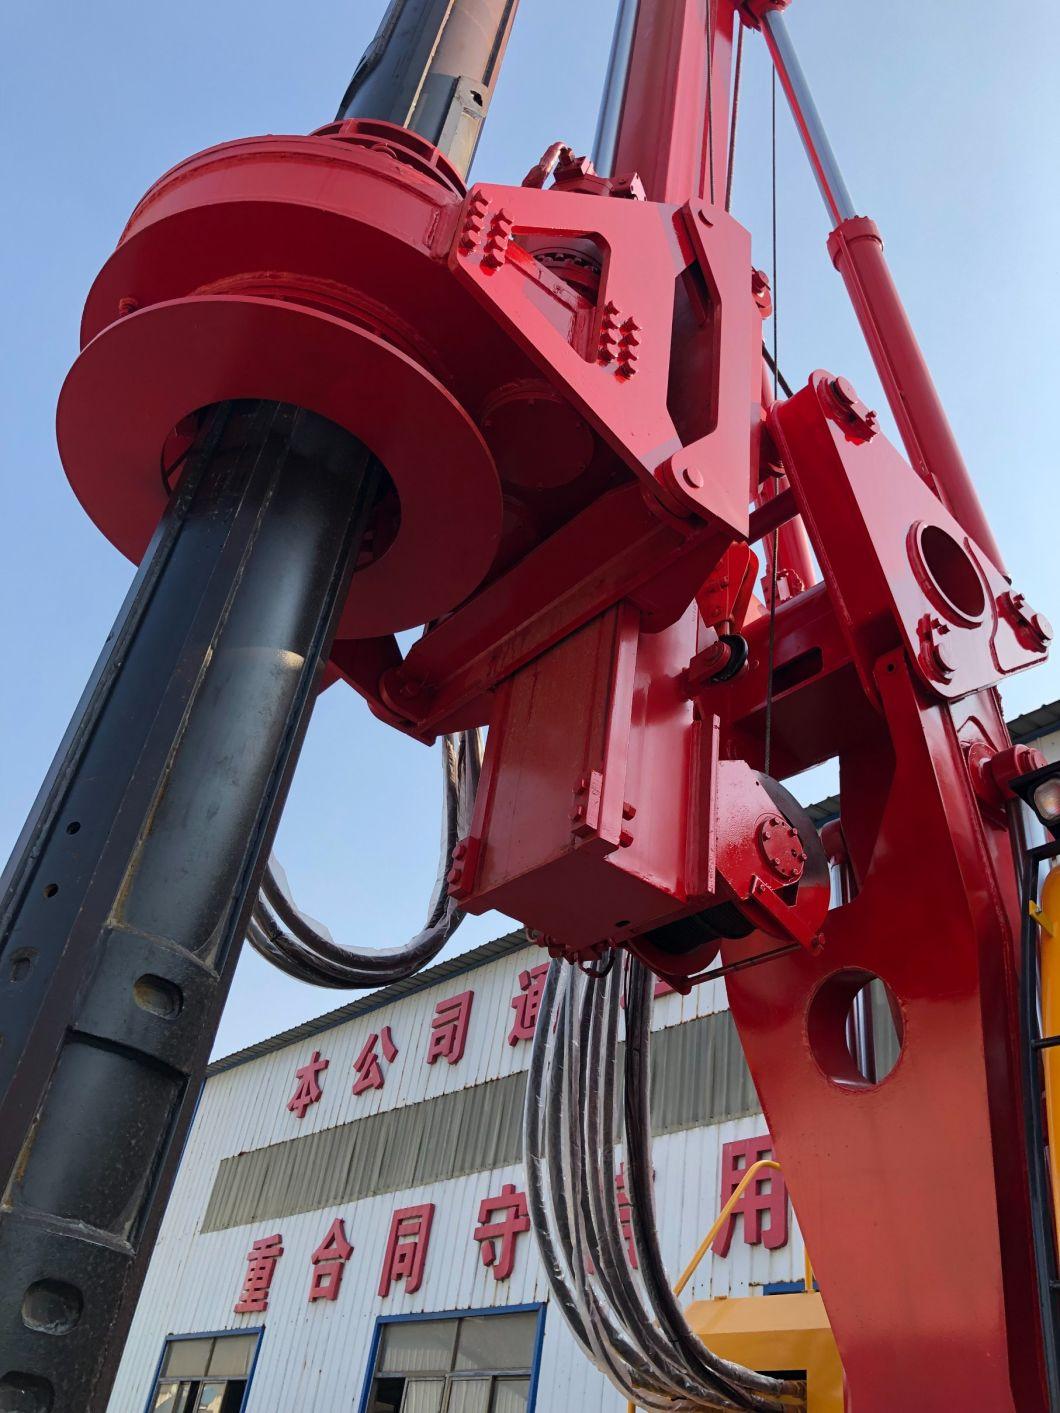 Hydraulic Core Drilling Rig, Engineering Piling Rig Machine for 50m